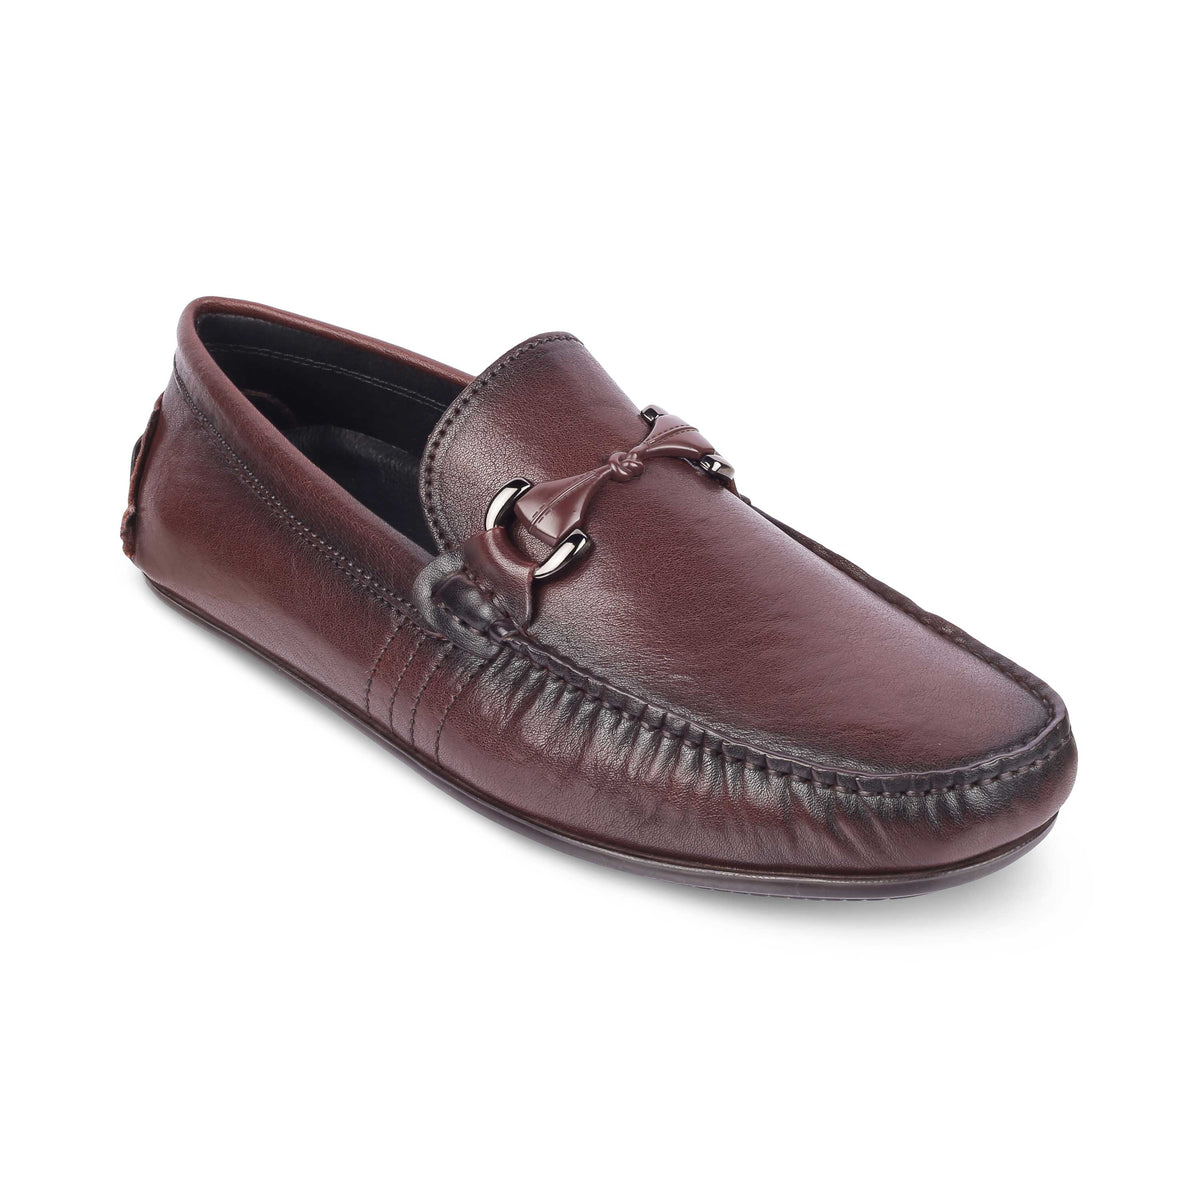 Tresmode Meroc Brown Men's Leather Driving Loafers - Tresmode